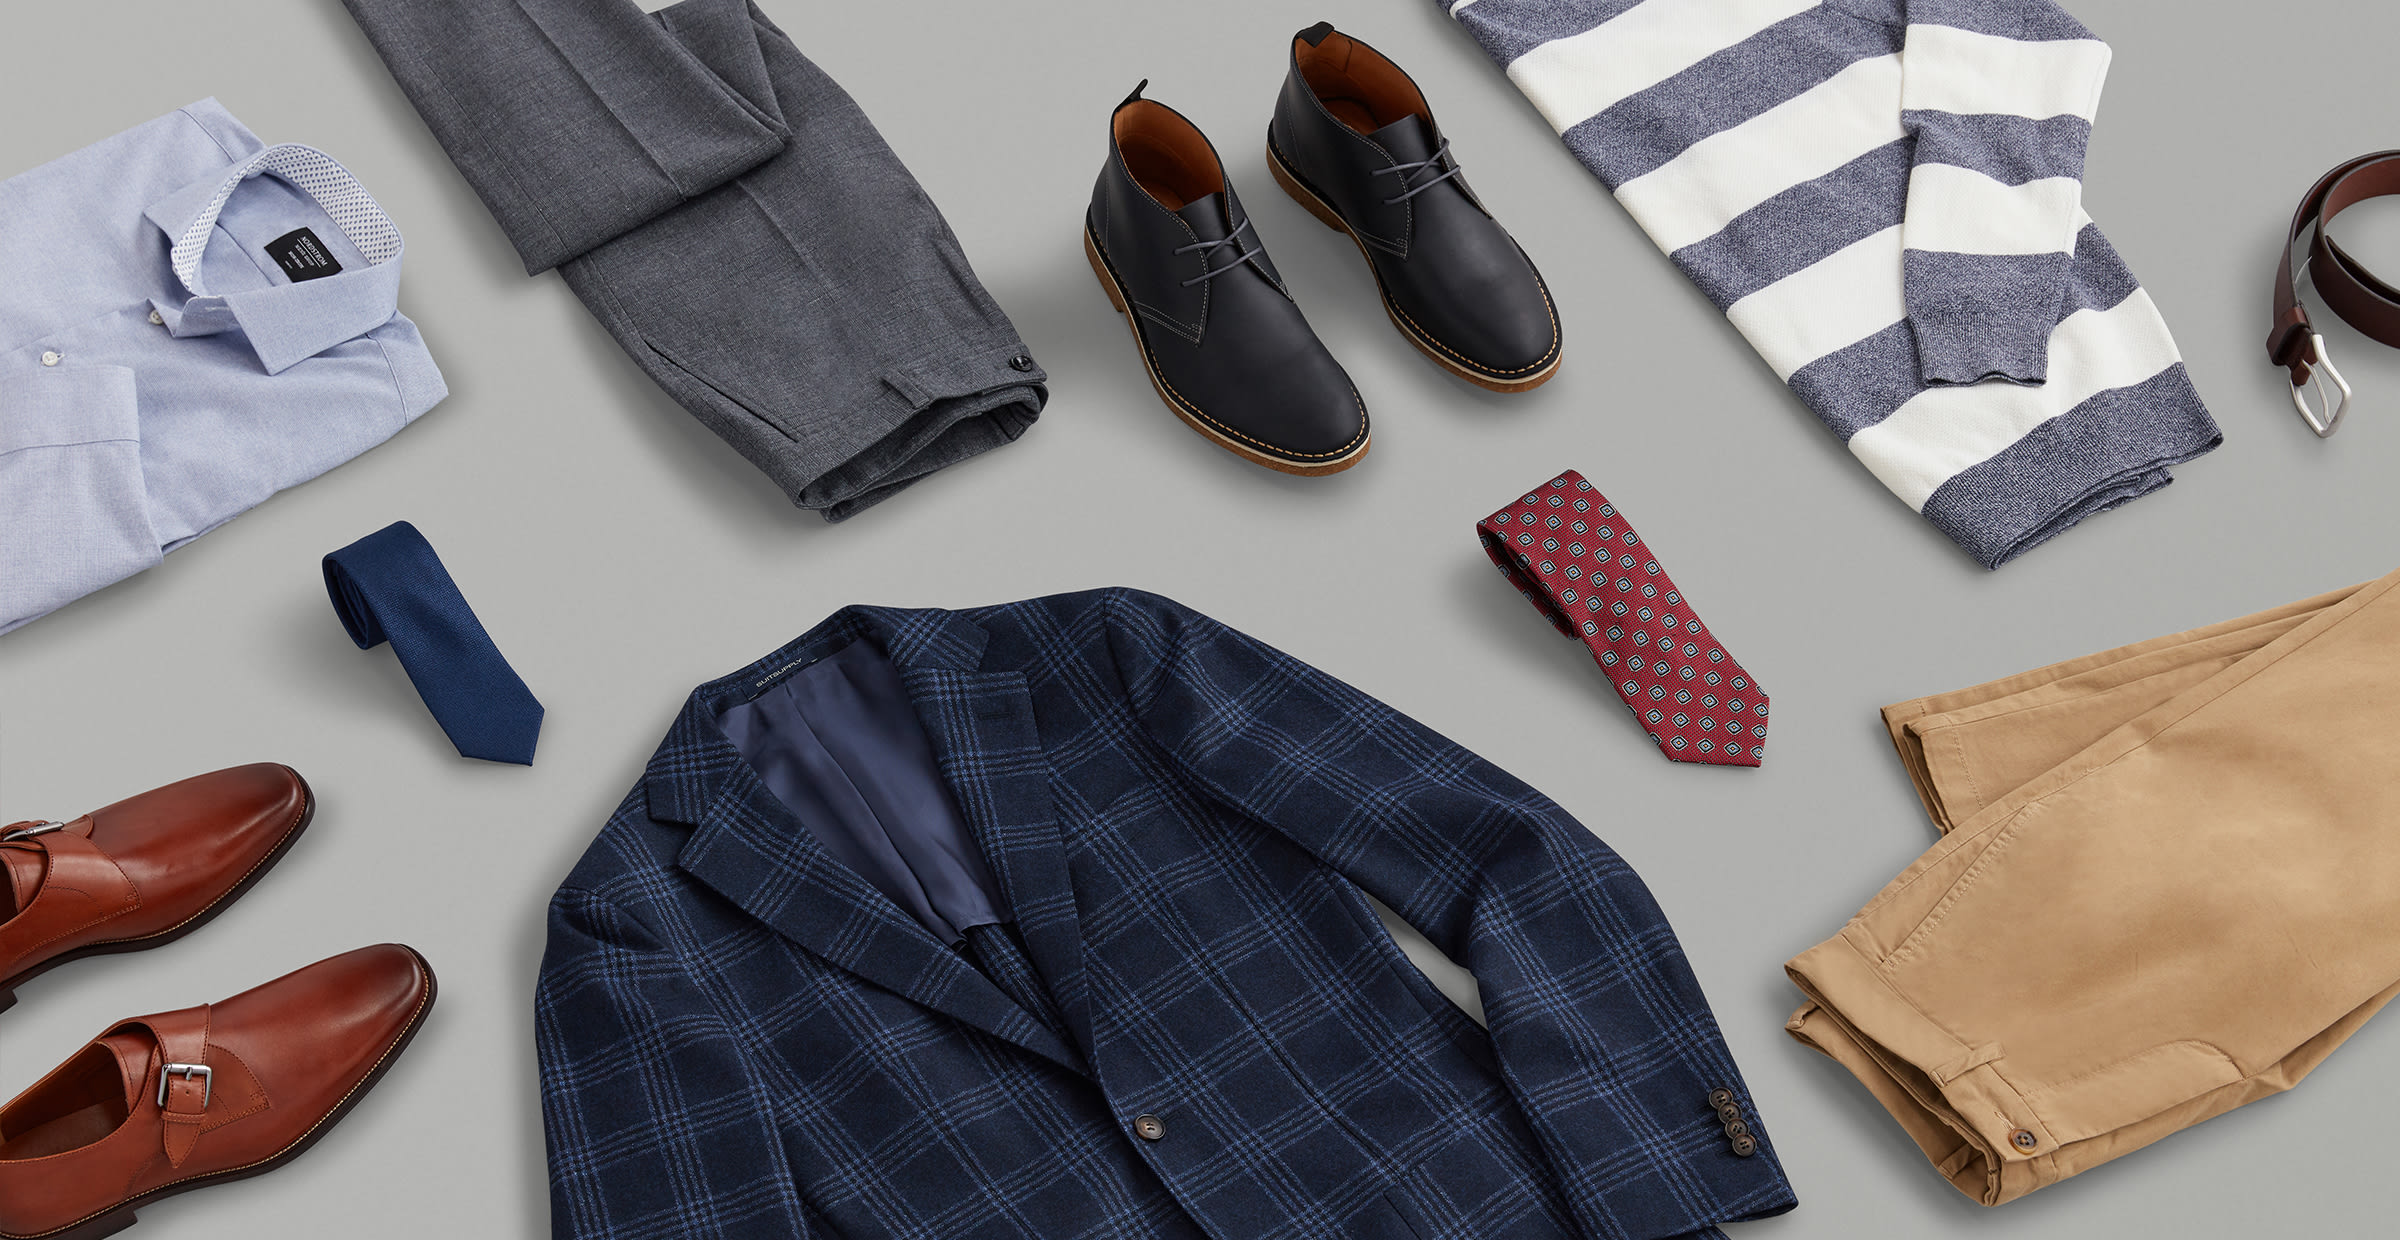 Date Night Outfits for Men. Nordstrom Trunk Club